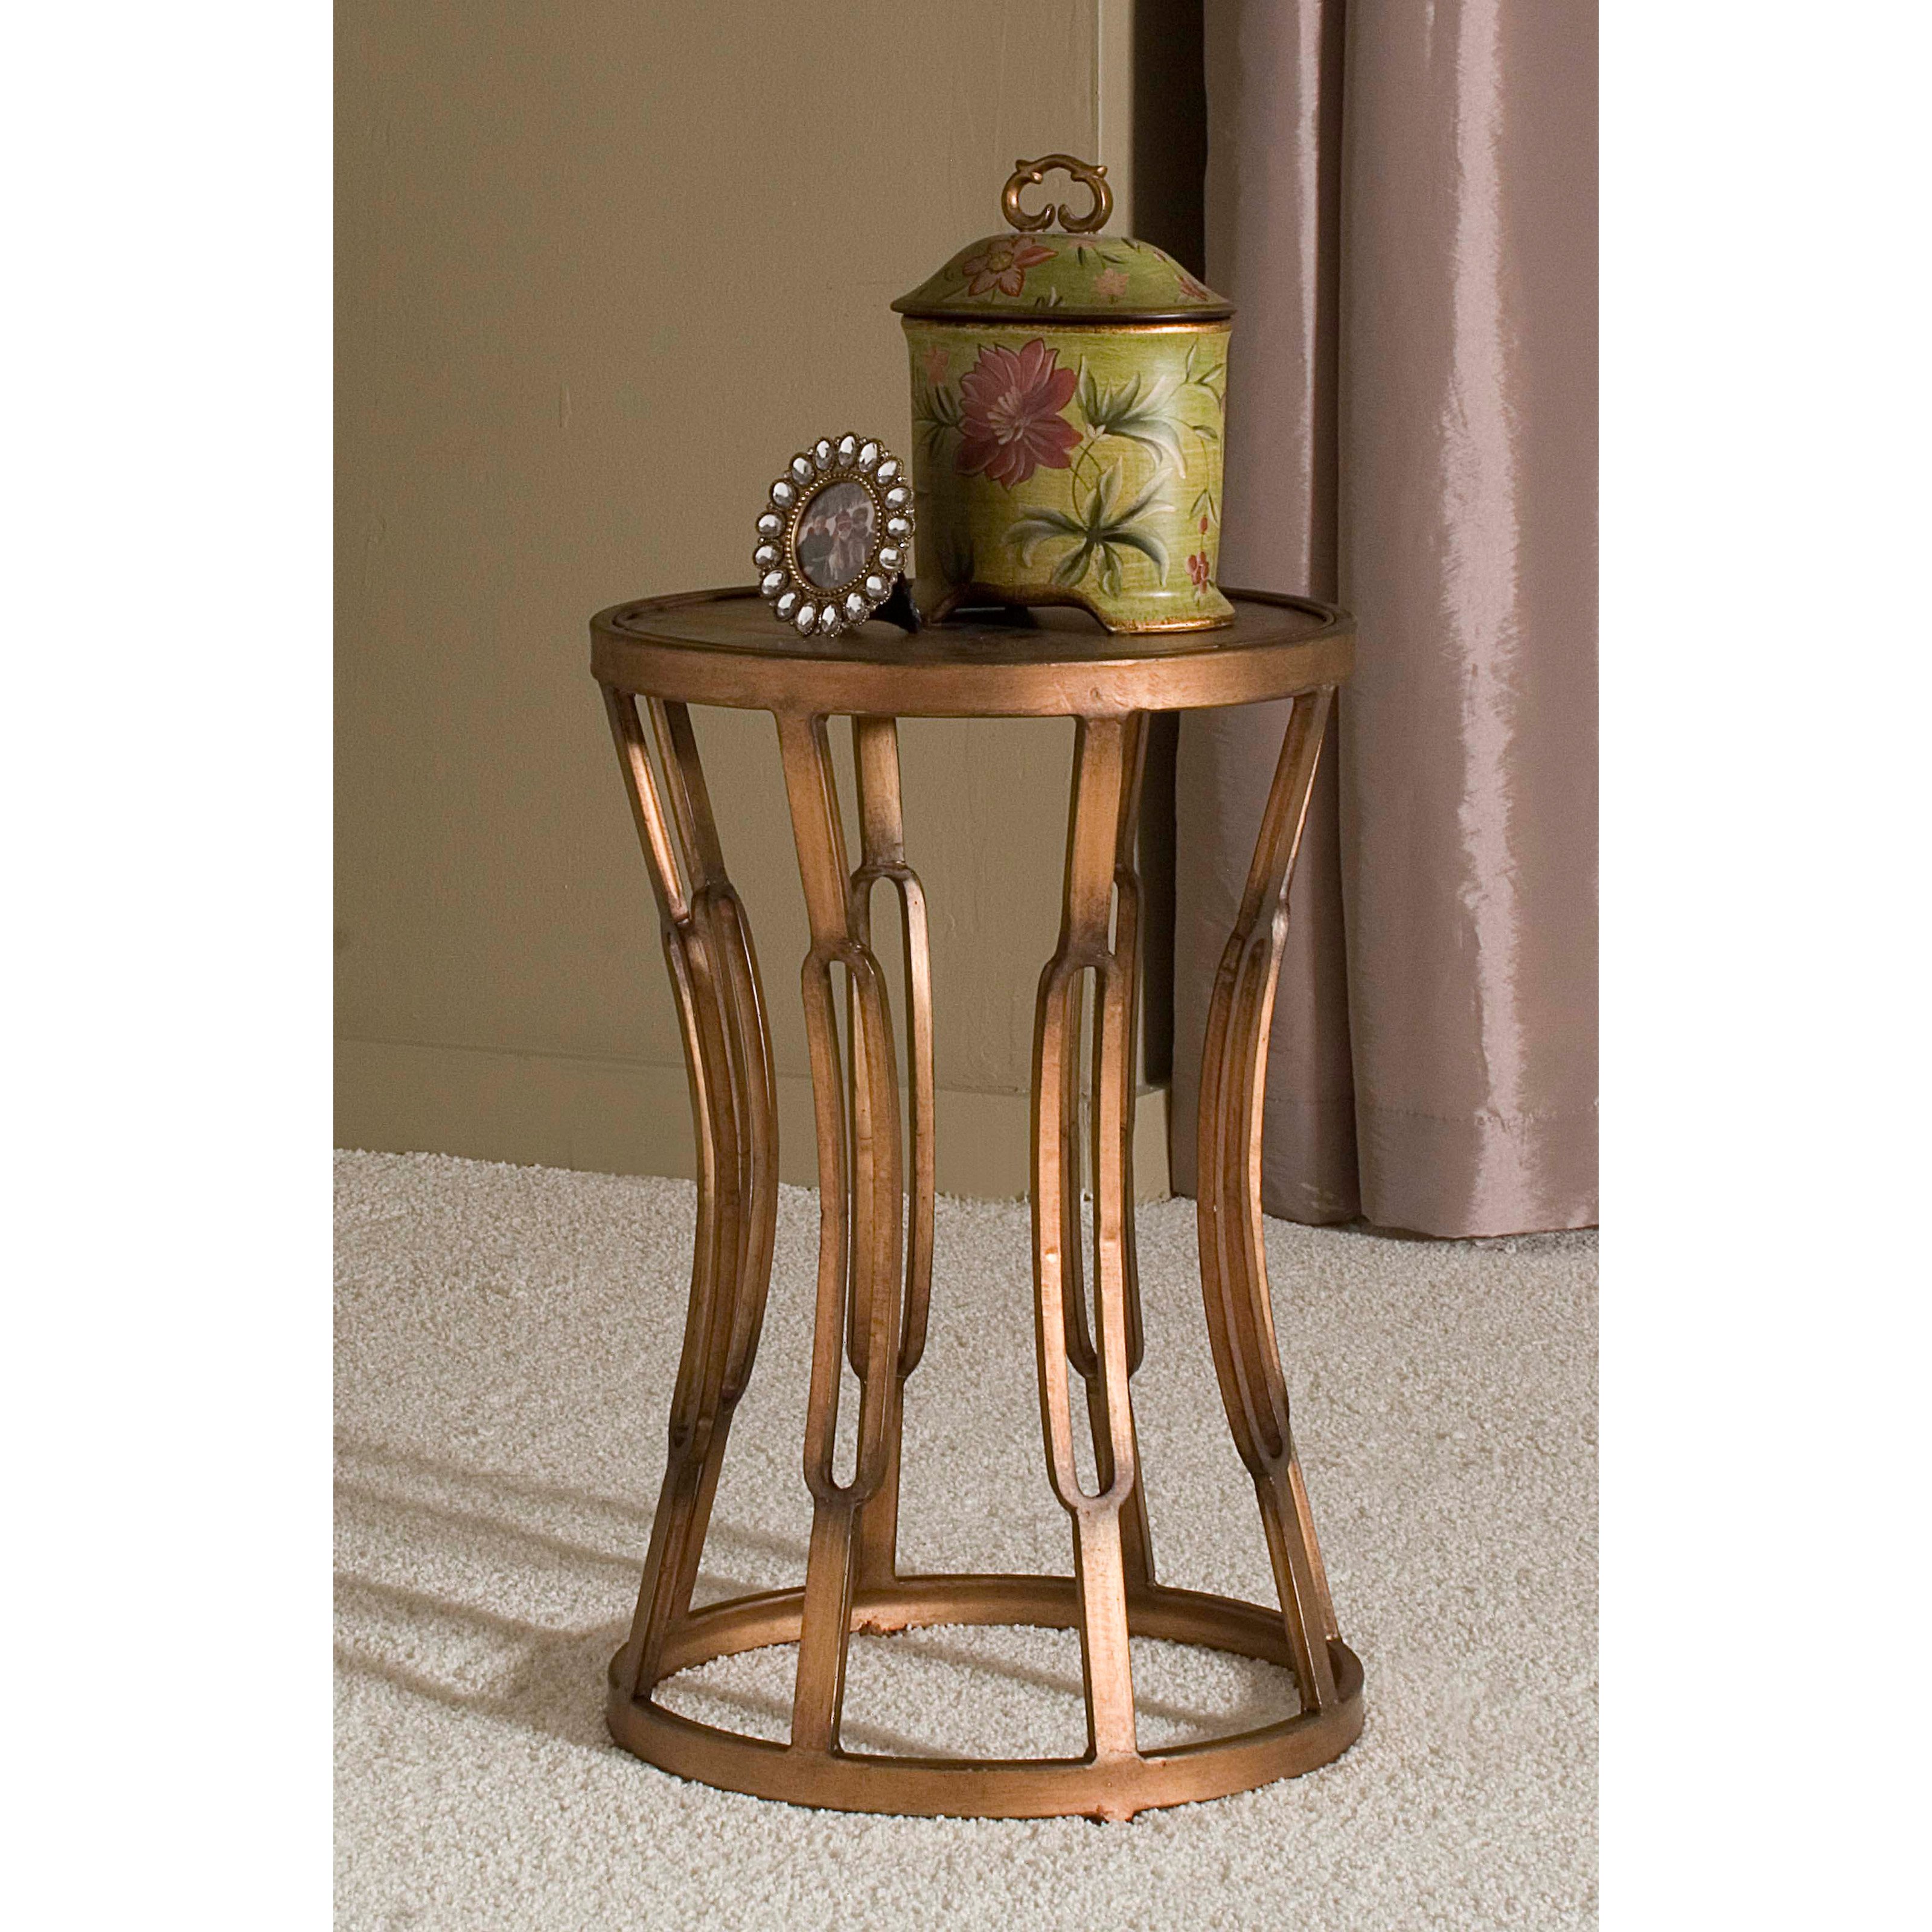 innerspace hourglass accent table antique copper end french target drum foyer and mirror modern night lamp dining with couch seating small half moon console drawer folding coffee